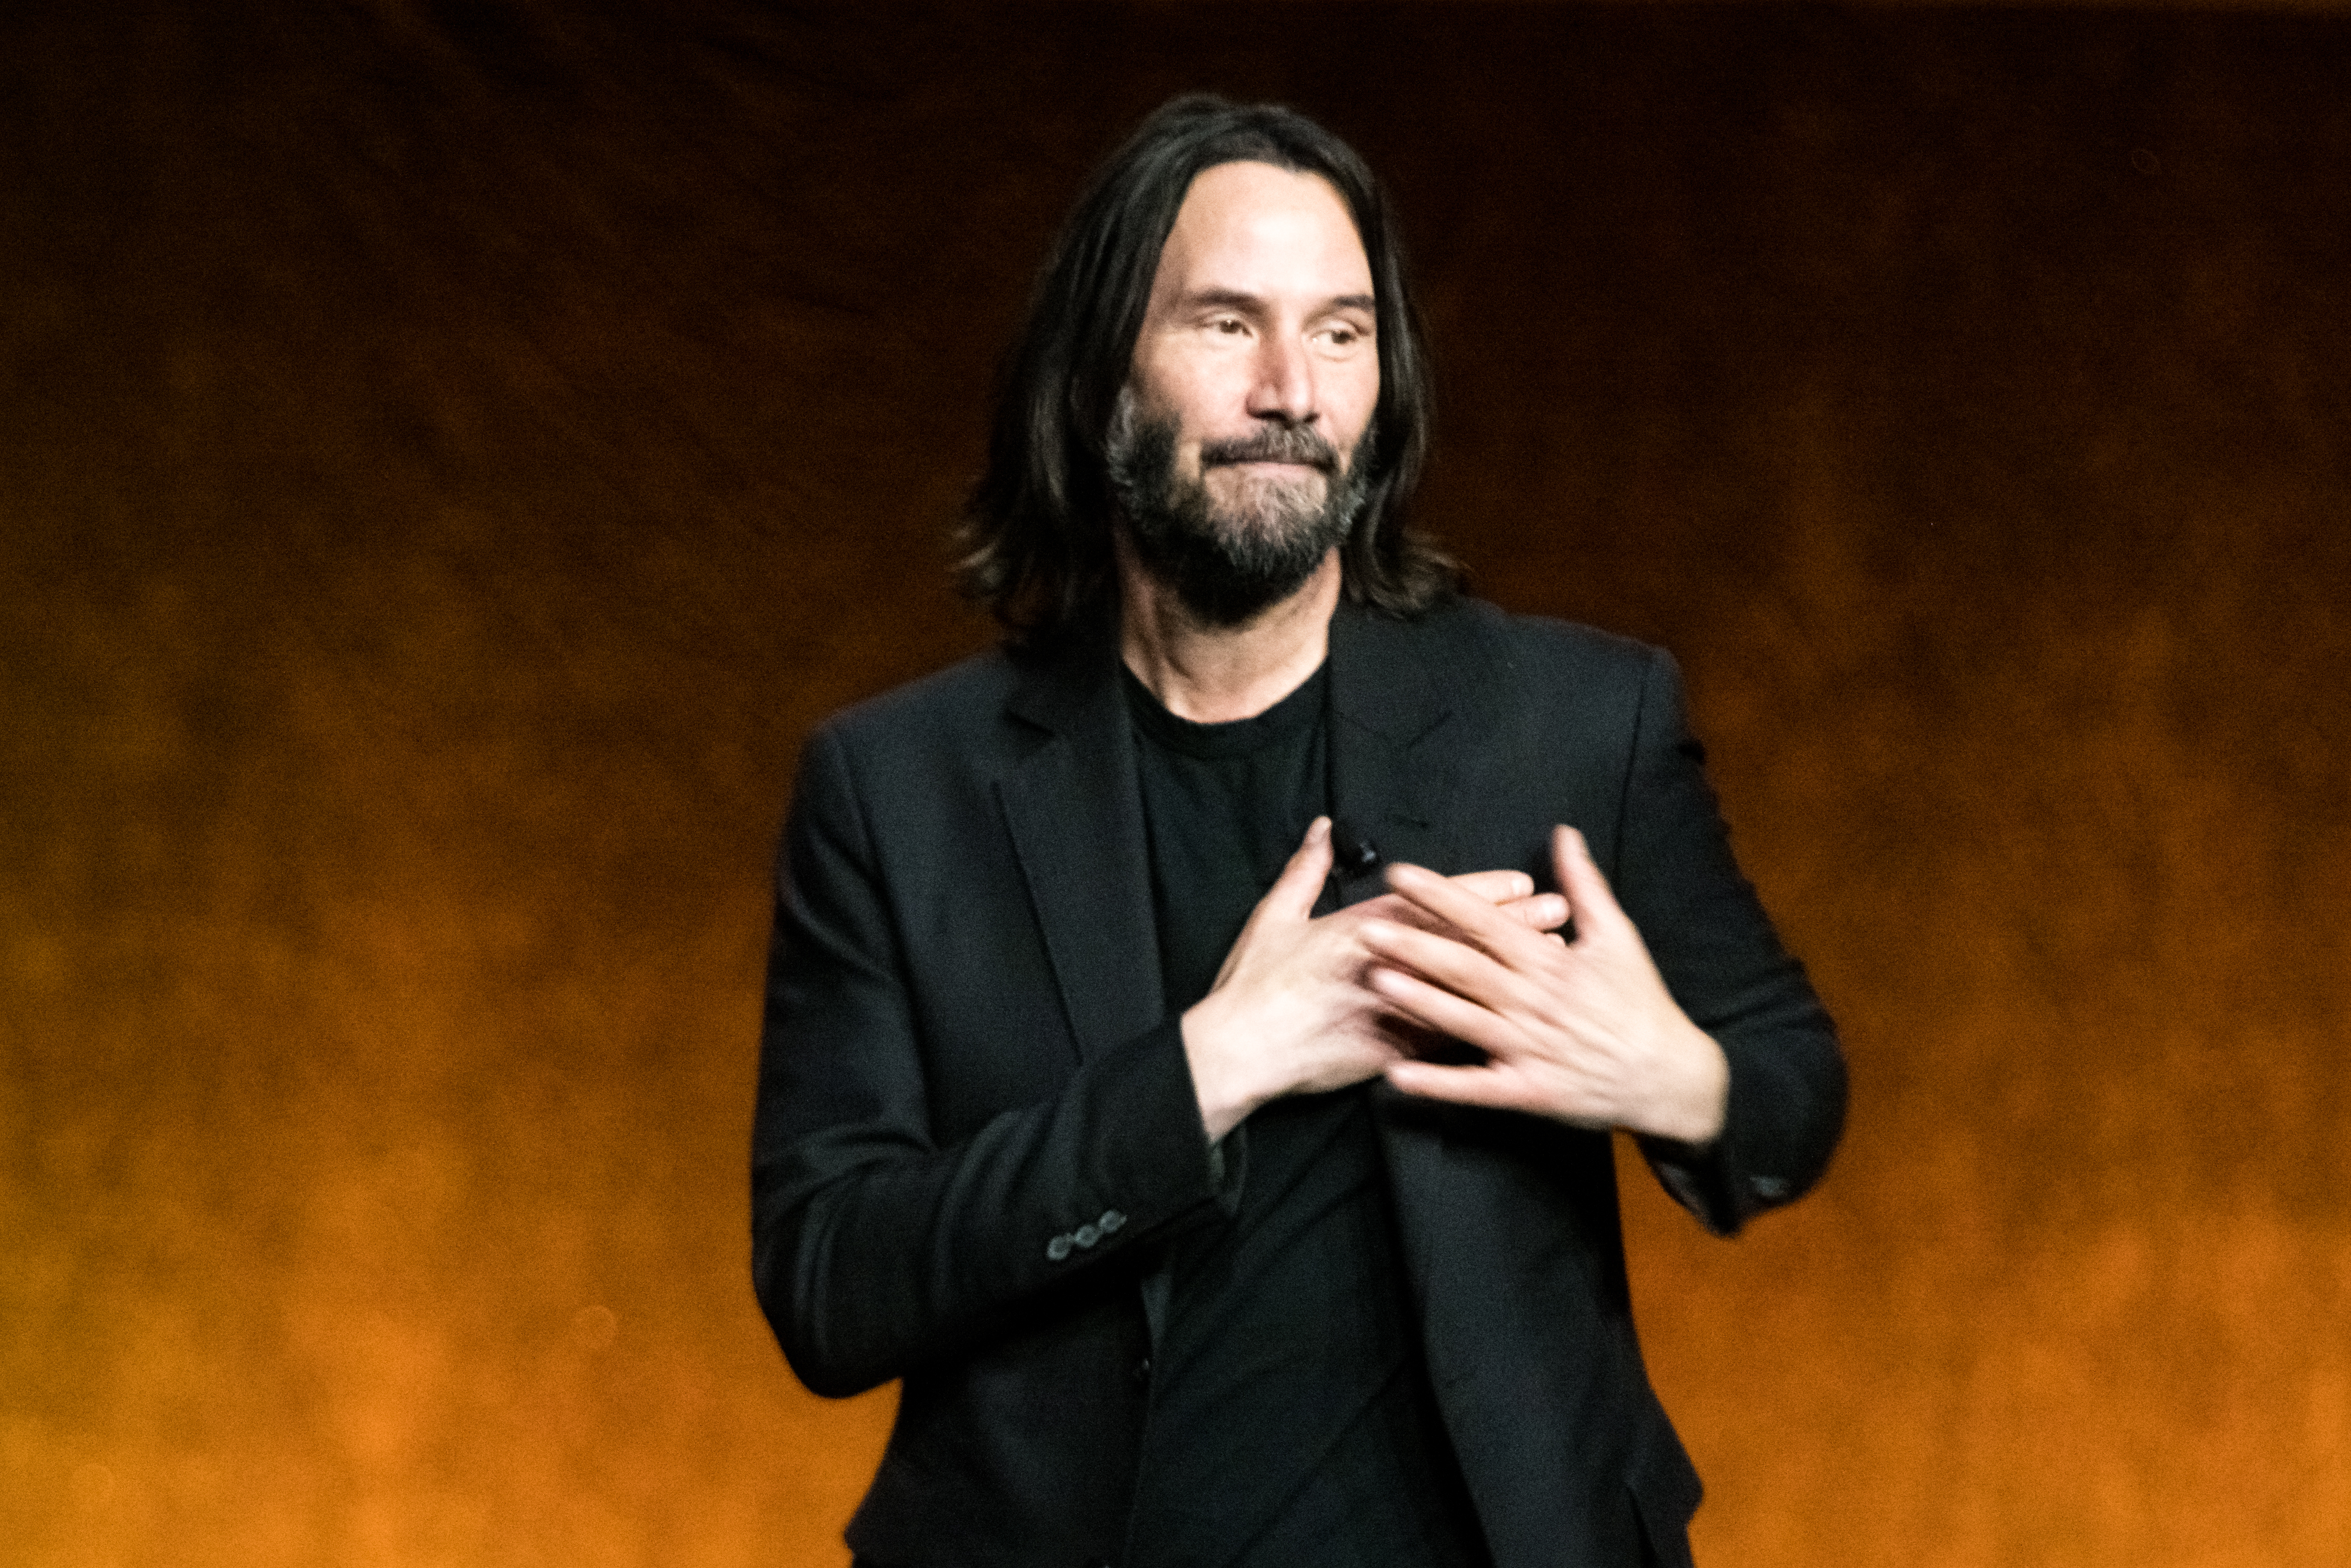 Actor Keanu Reeves presents the movie "John Wick: Chapter 4" at Lionsgate's exclusive presentation at Caesars Palace during CinemaCon 2022, the official convention of the National Association of Theatre Owners, on April 28, 2022, in Las Vegas, Nevada. | Source: Getty Images